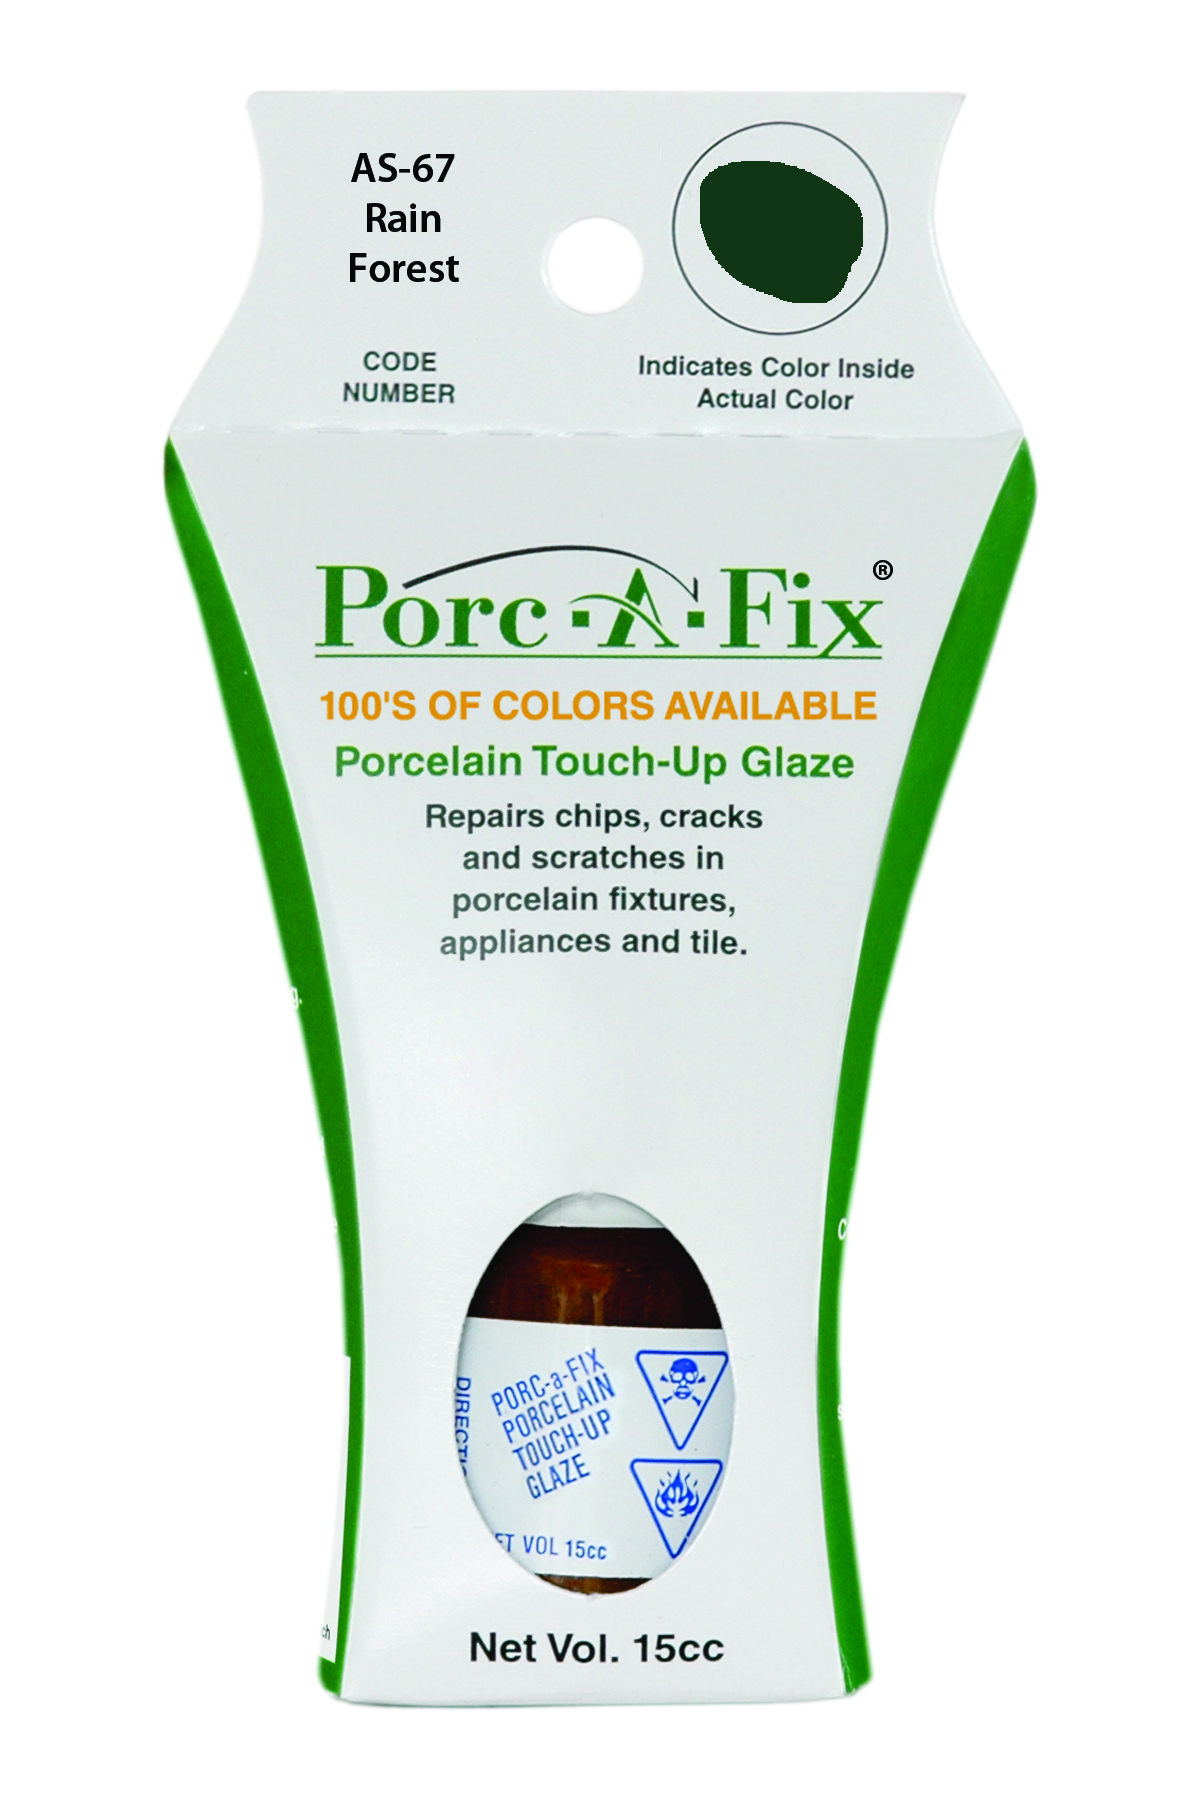 Fixture-Fix | AS-67 | Porc-A-Fix Touch-Up Glaze American Standard Rain Forest - Compatible with American Standard 070900-2110A Touch Up Paint Kit - RAIN FOREST